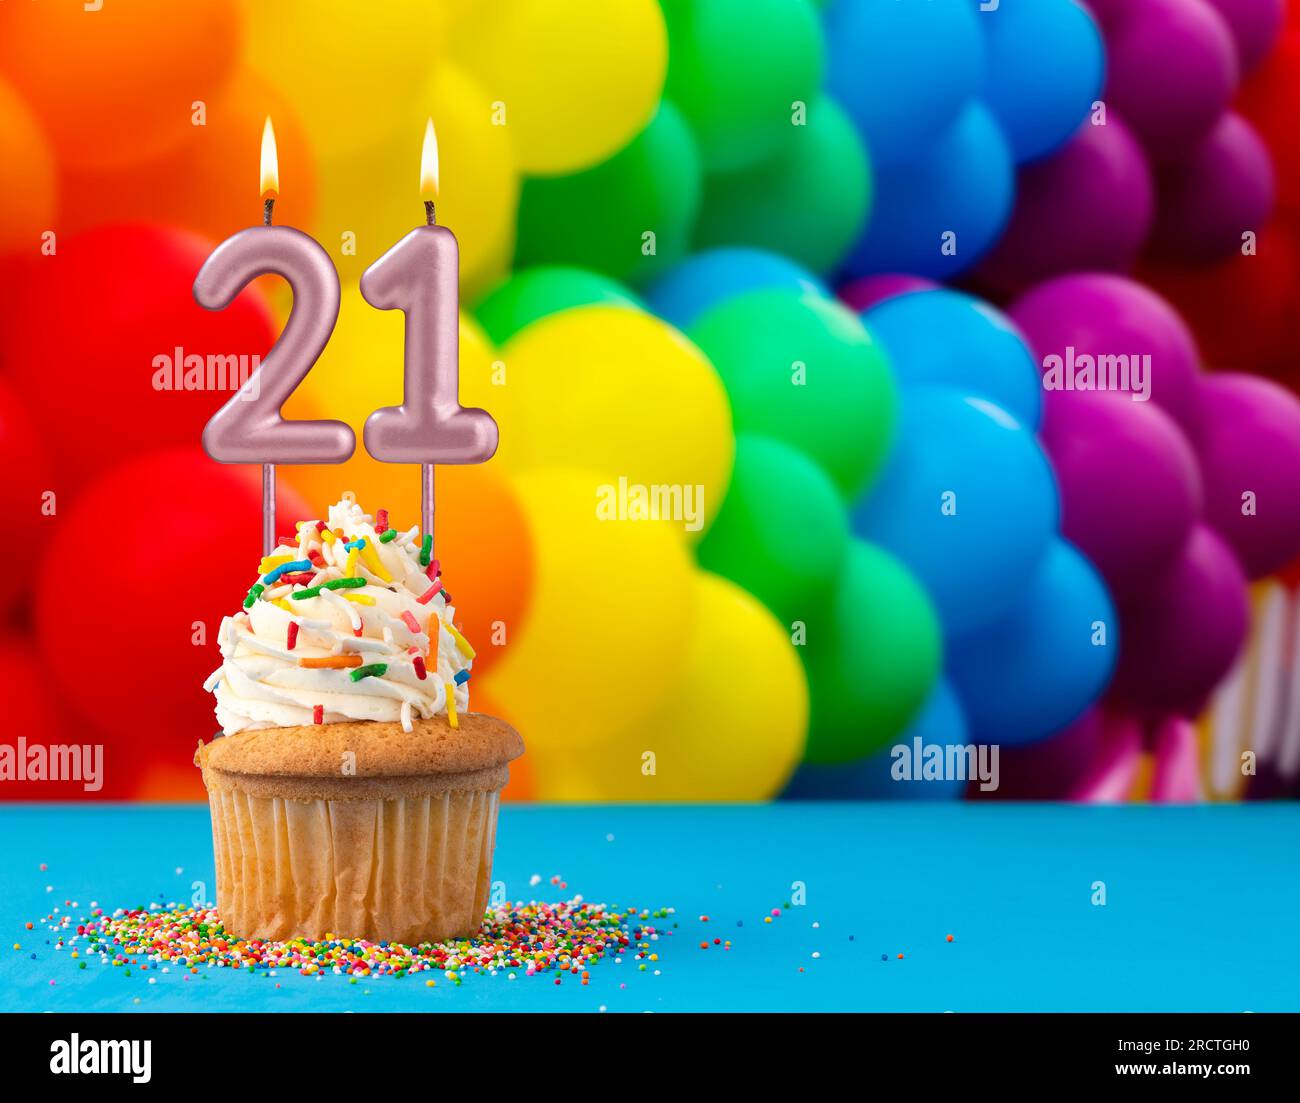 birthday-candle-number-21-invitation-card-with-balloons-in-colors-of